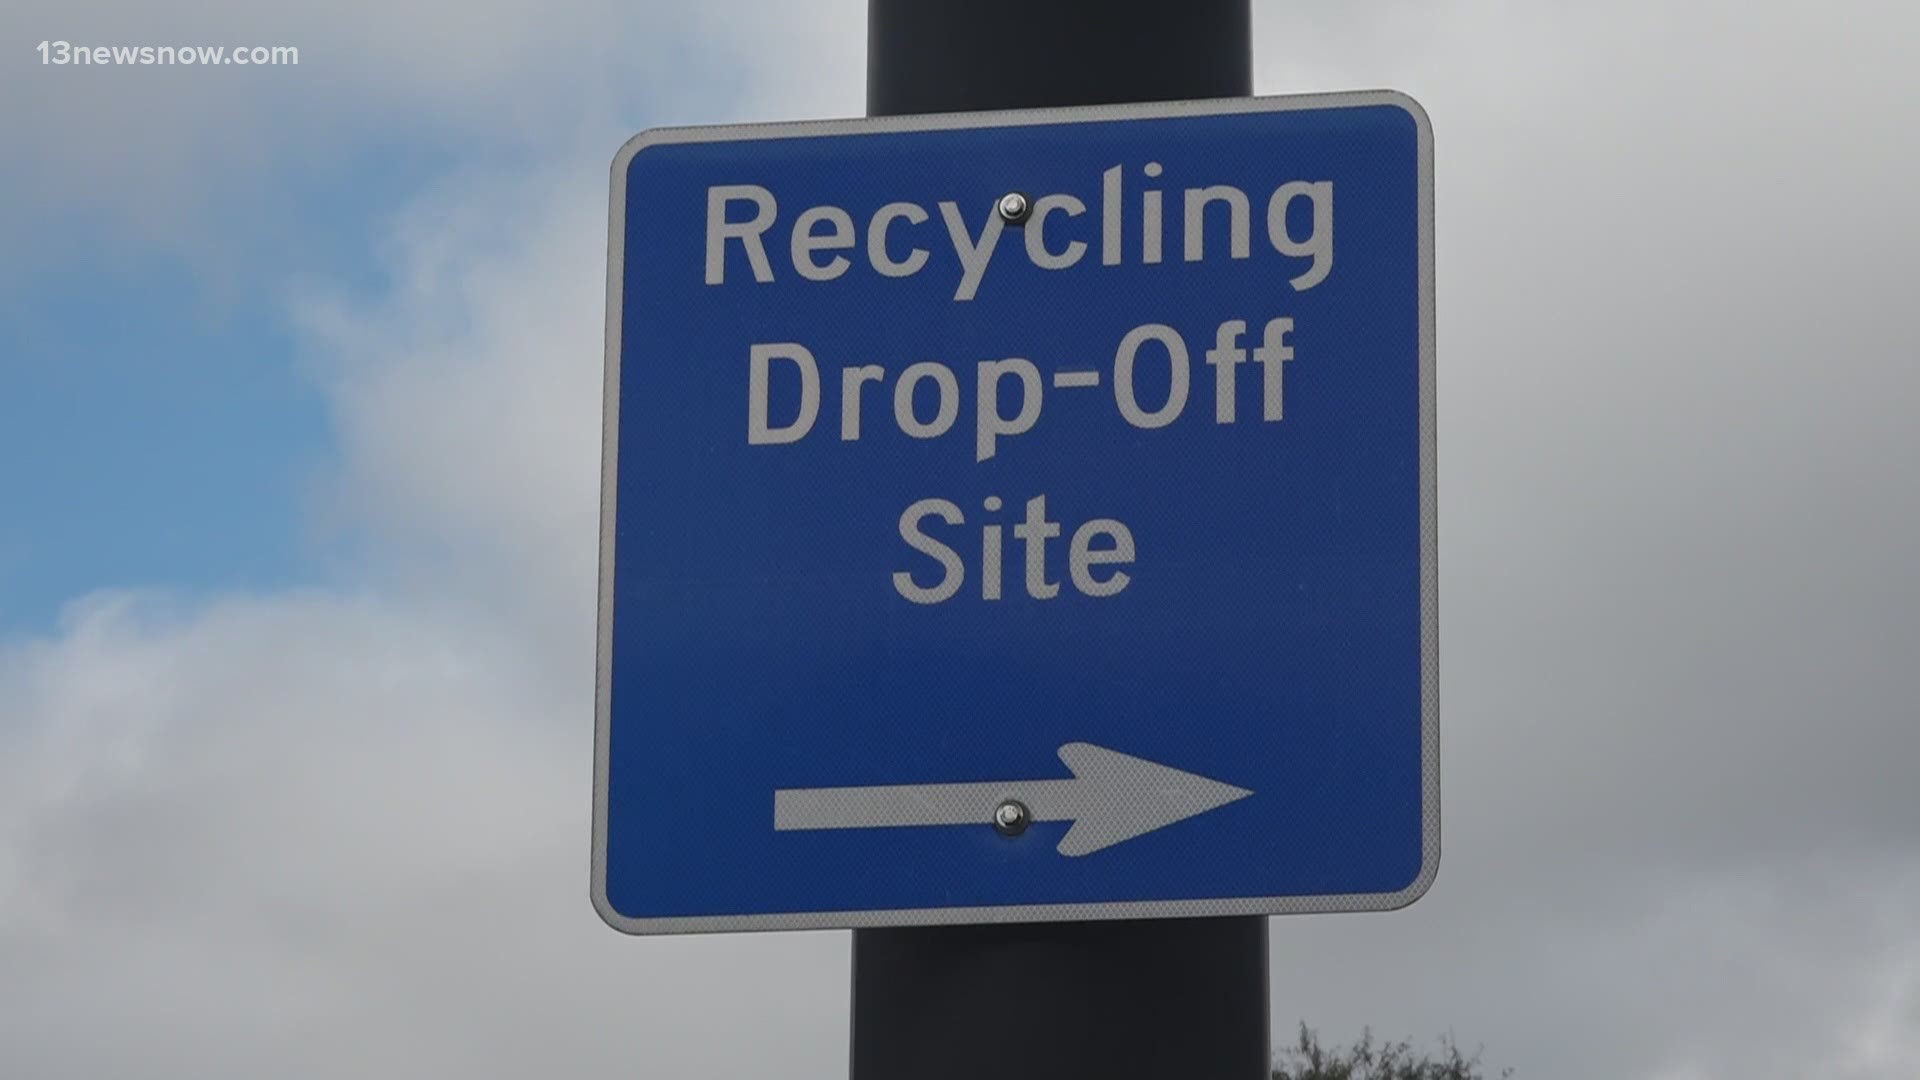 The city is making some upgrades to cut back on illegal trash dumping, so the center doesn't get completely shut down.